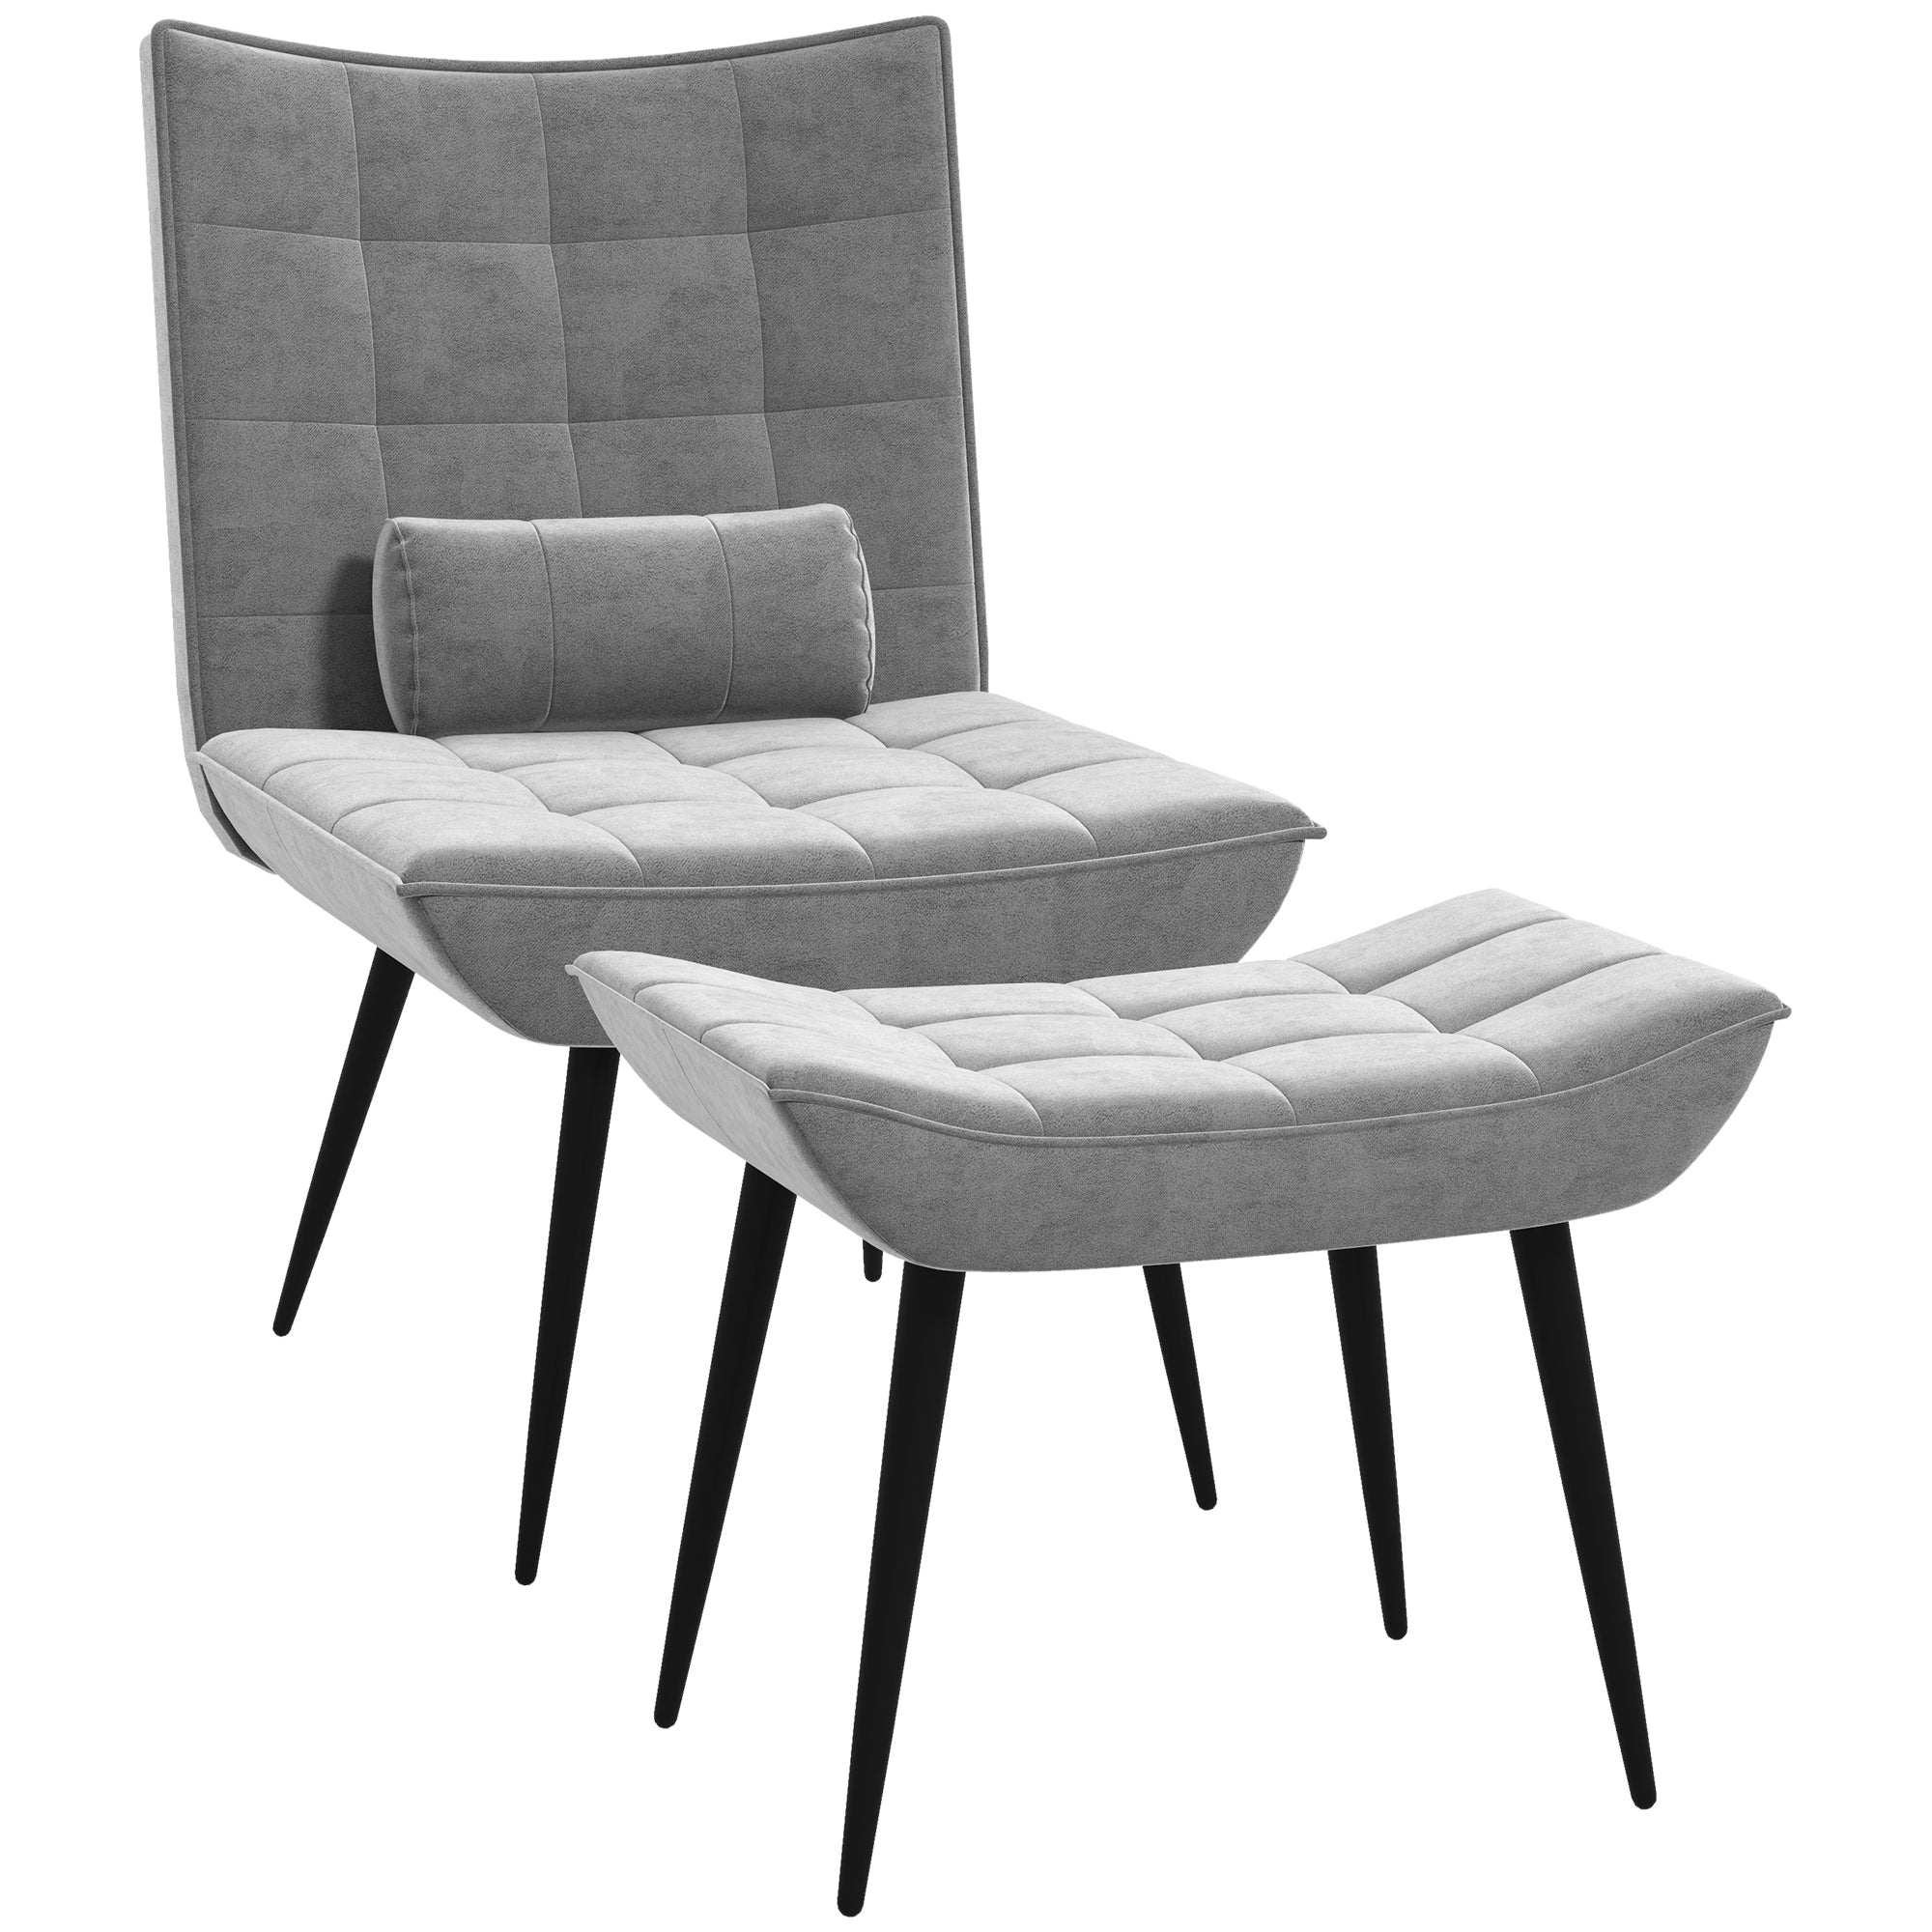 Armless Accent Chair w/ Footstool Set, Modern Tufted Upholstered Lounge Chair w/ Pillow, Steel Legs, Grey-0